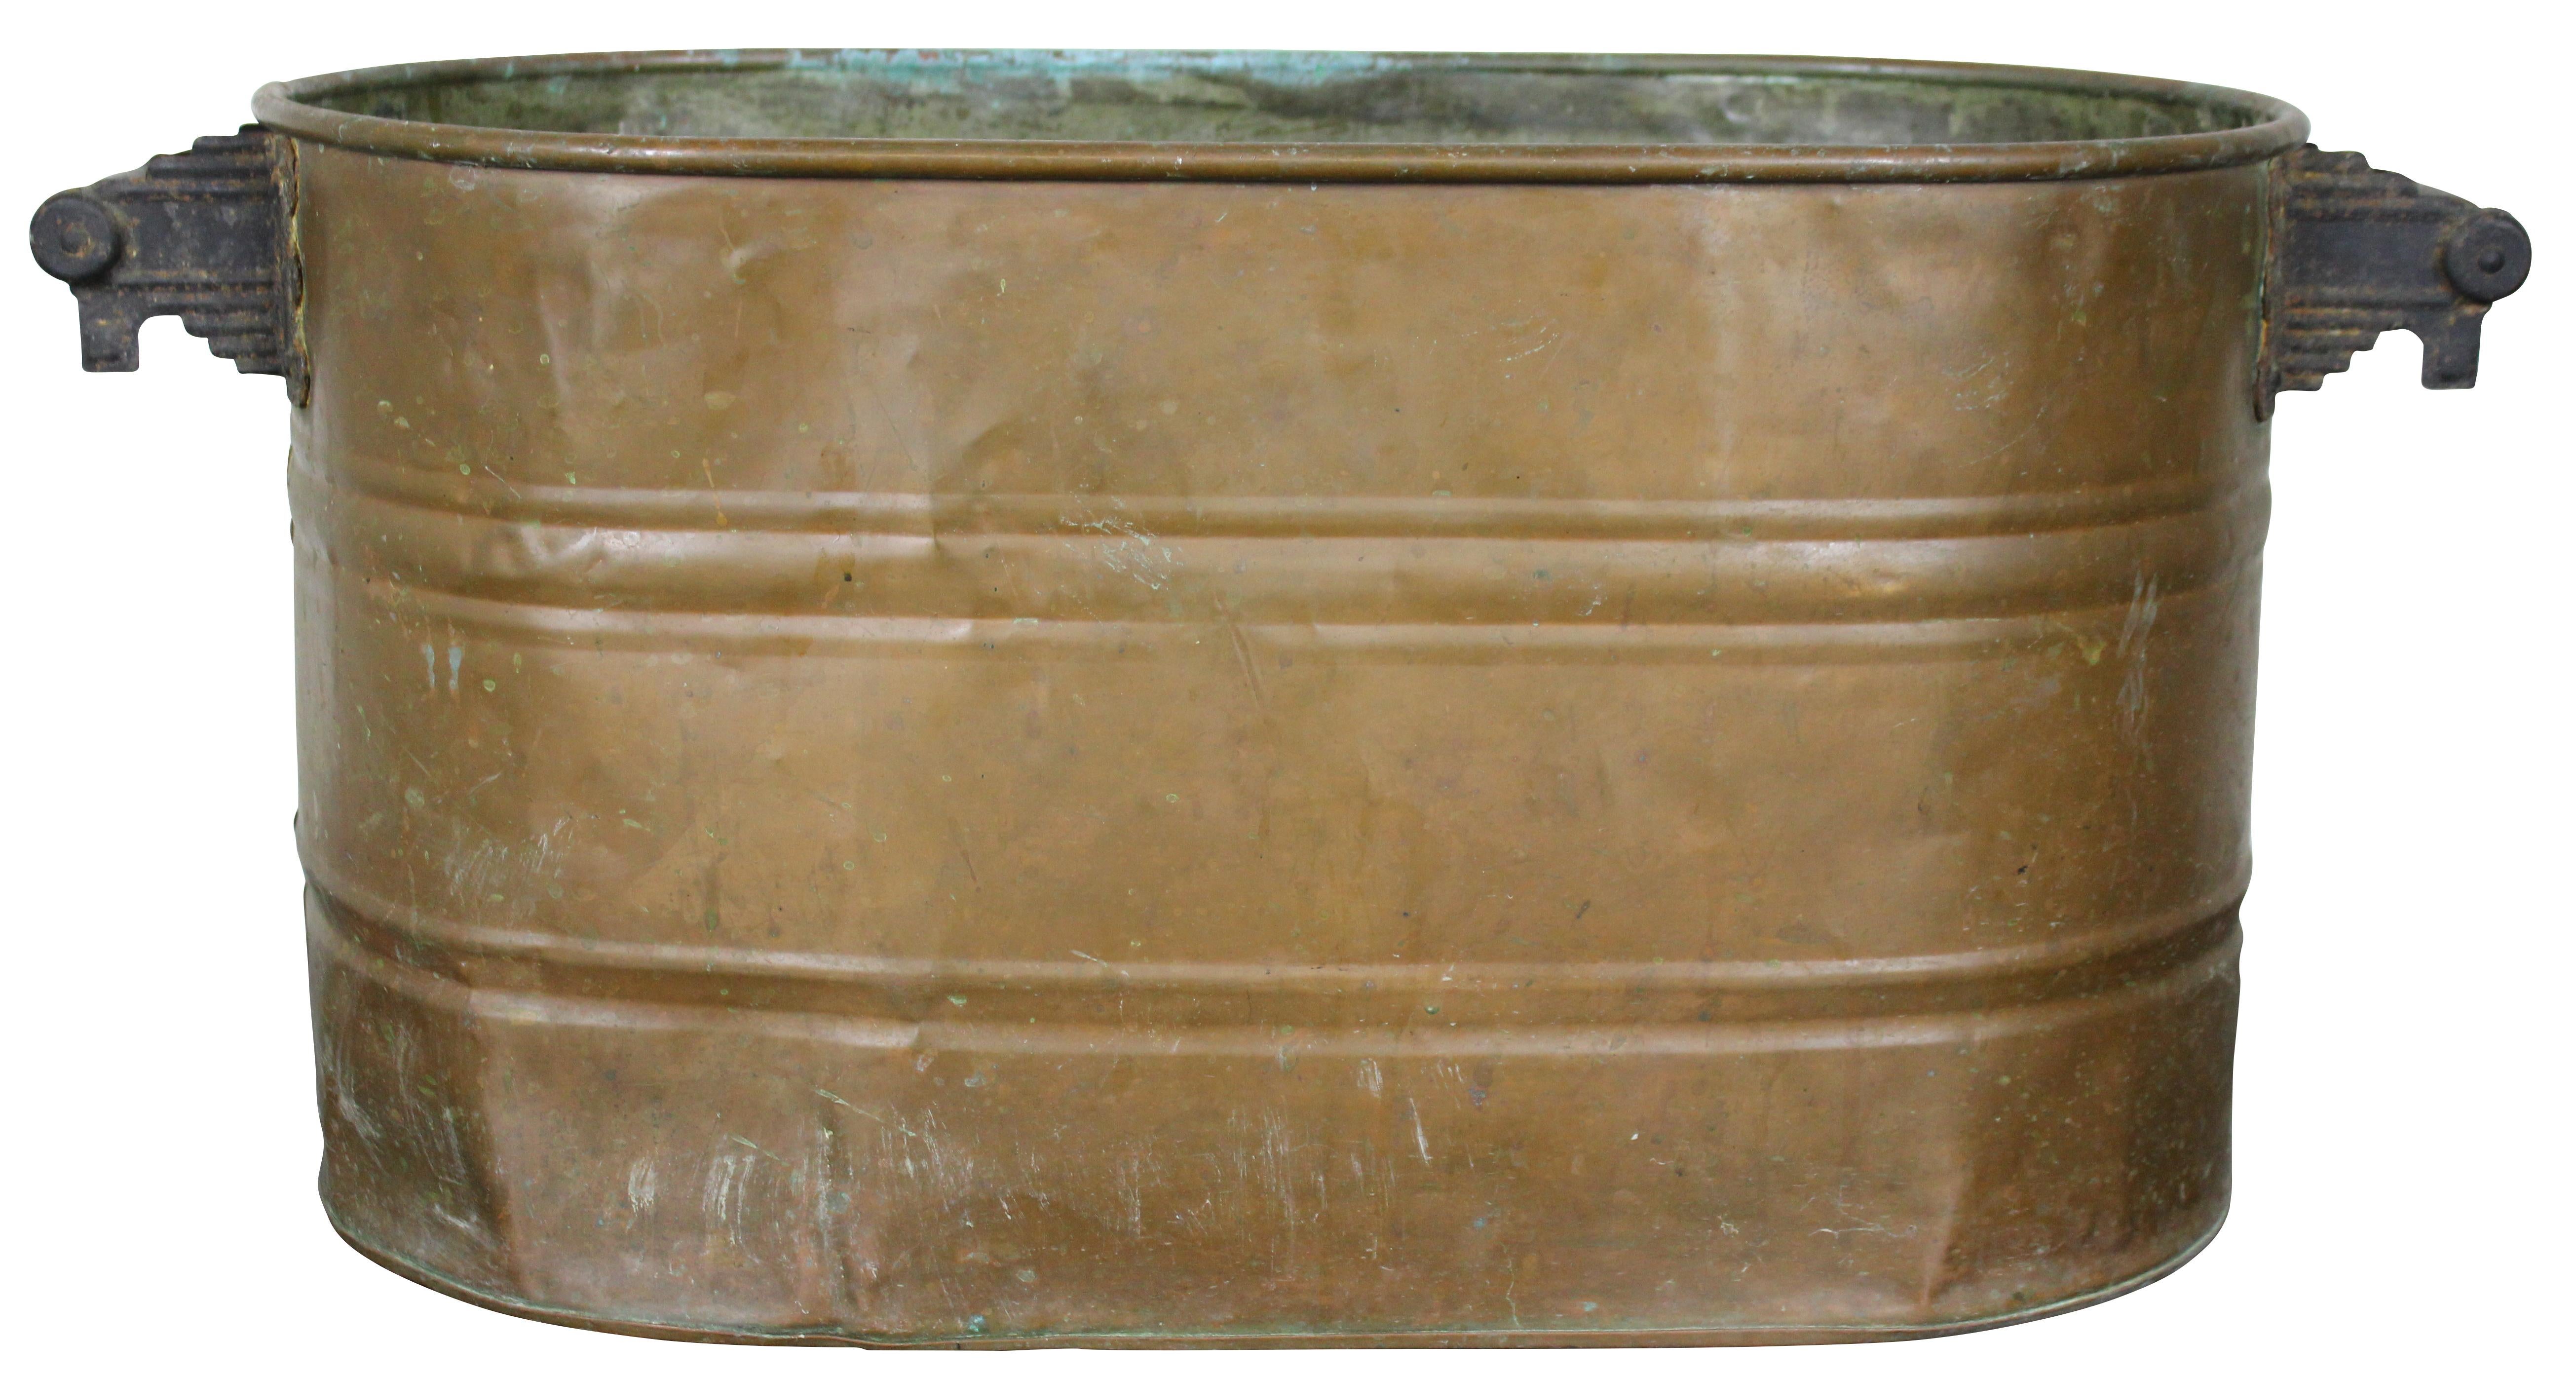 Antique copper boiler, firewood bin or wash tub with Art Deco style iron handles. Measure: 28”.

 